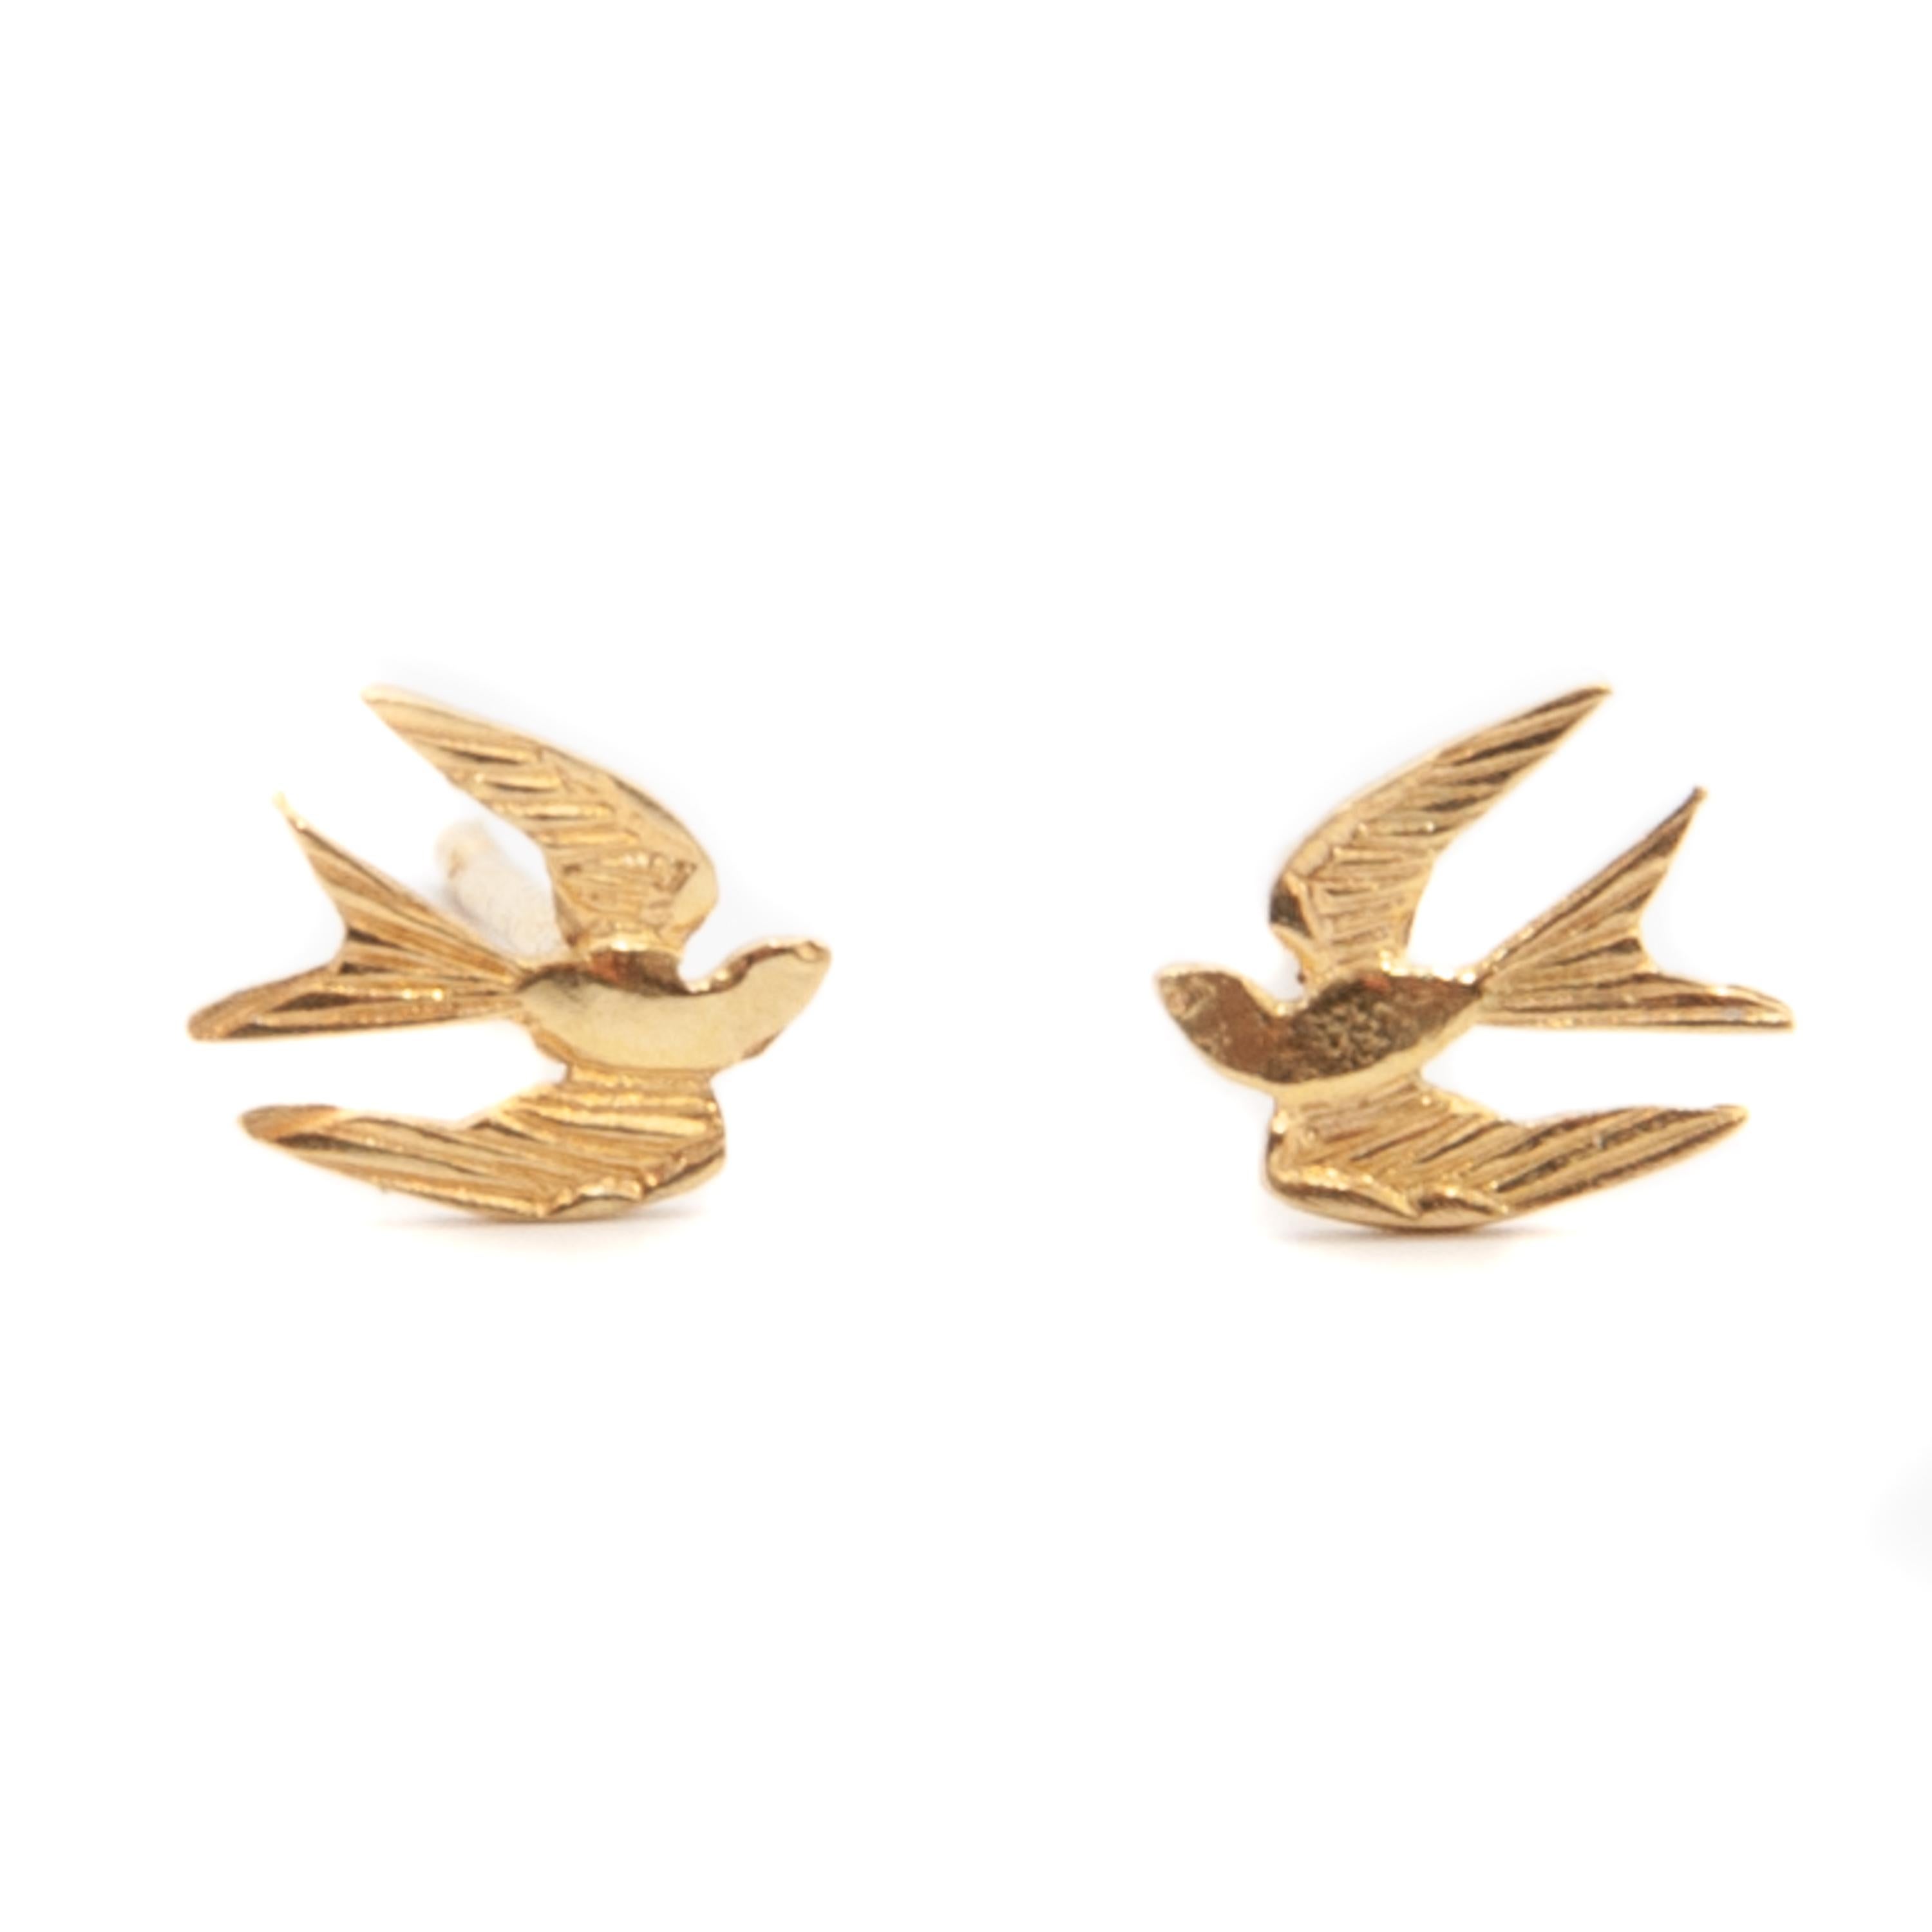 Timeless 18 karat gold flying swallow birds stud earrings. The swallow is a bird that represents love, care and affection towards family and friends, showing the loyalty of the person who always returns to them. The swallows also represent eternal